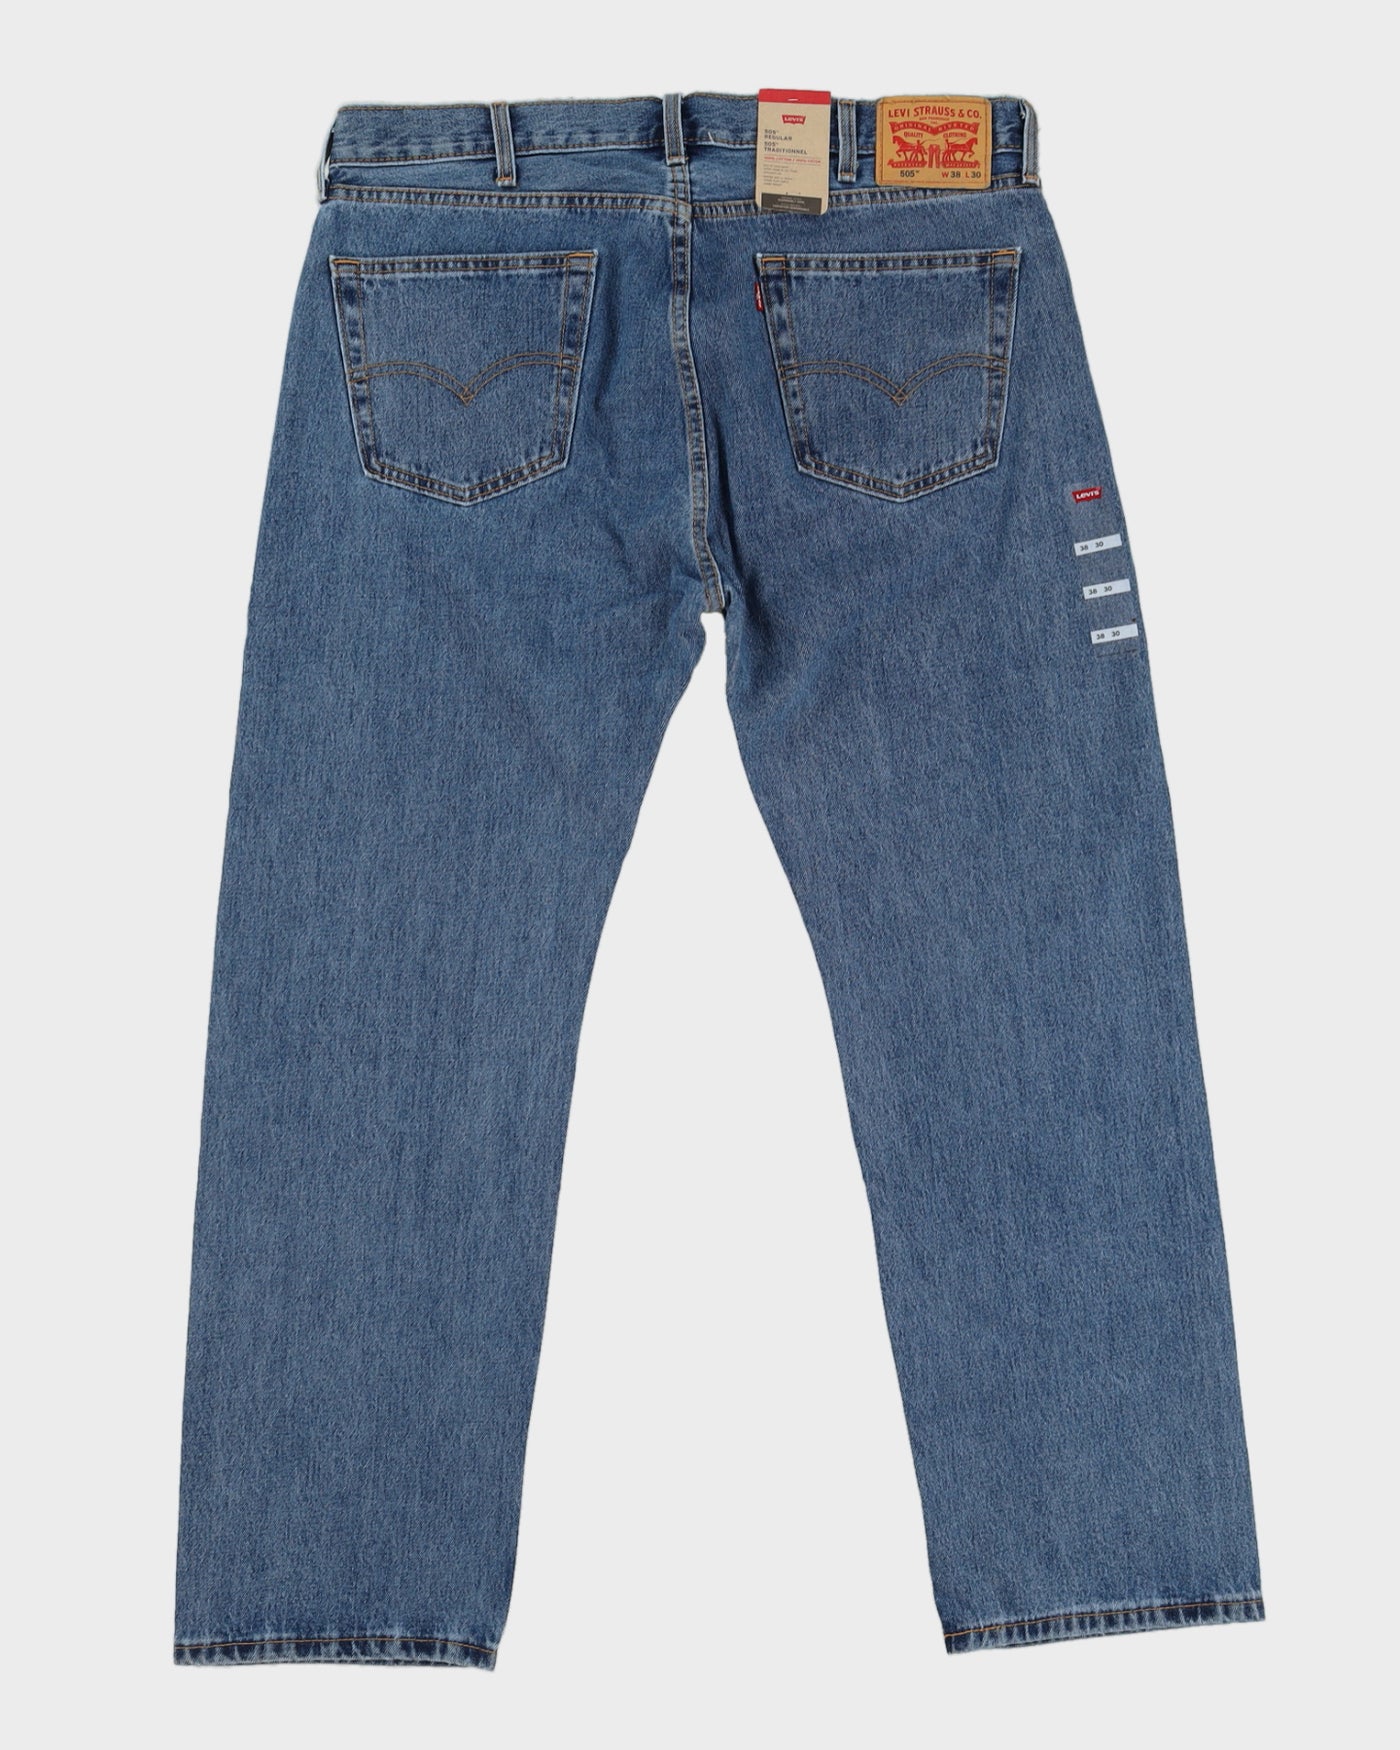 Levi's 505 Blue Medium Washed Jeans Deadstock With Tags - W38 L30